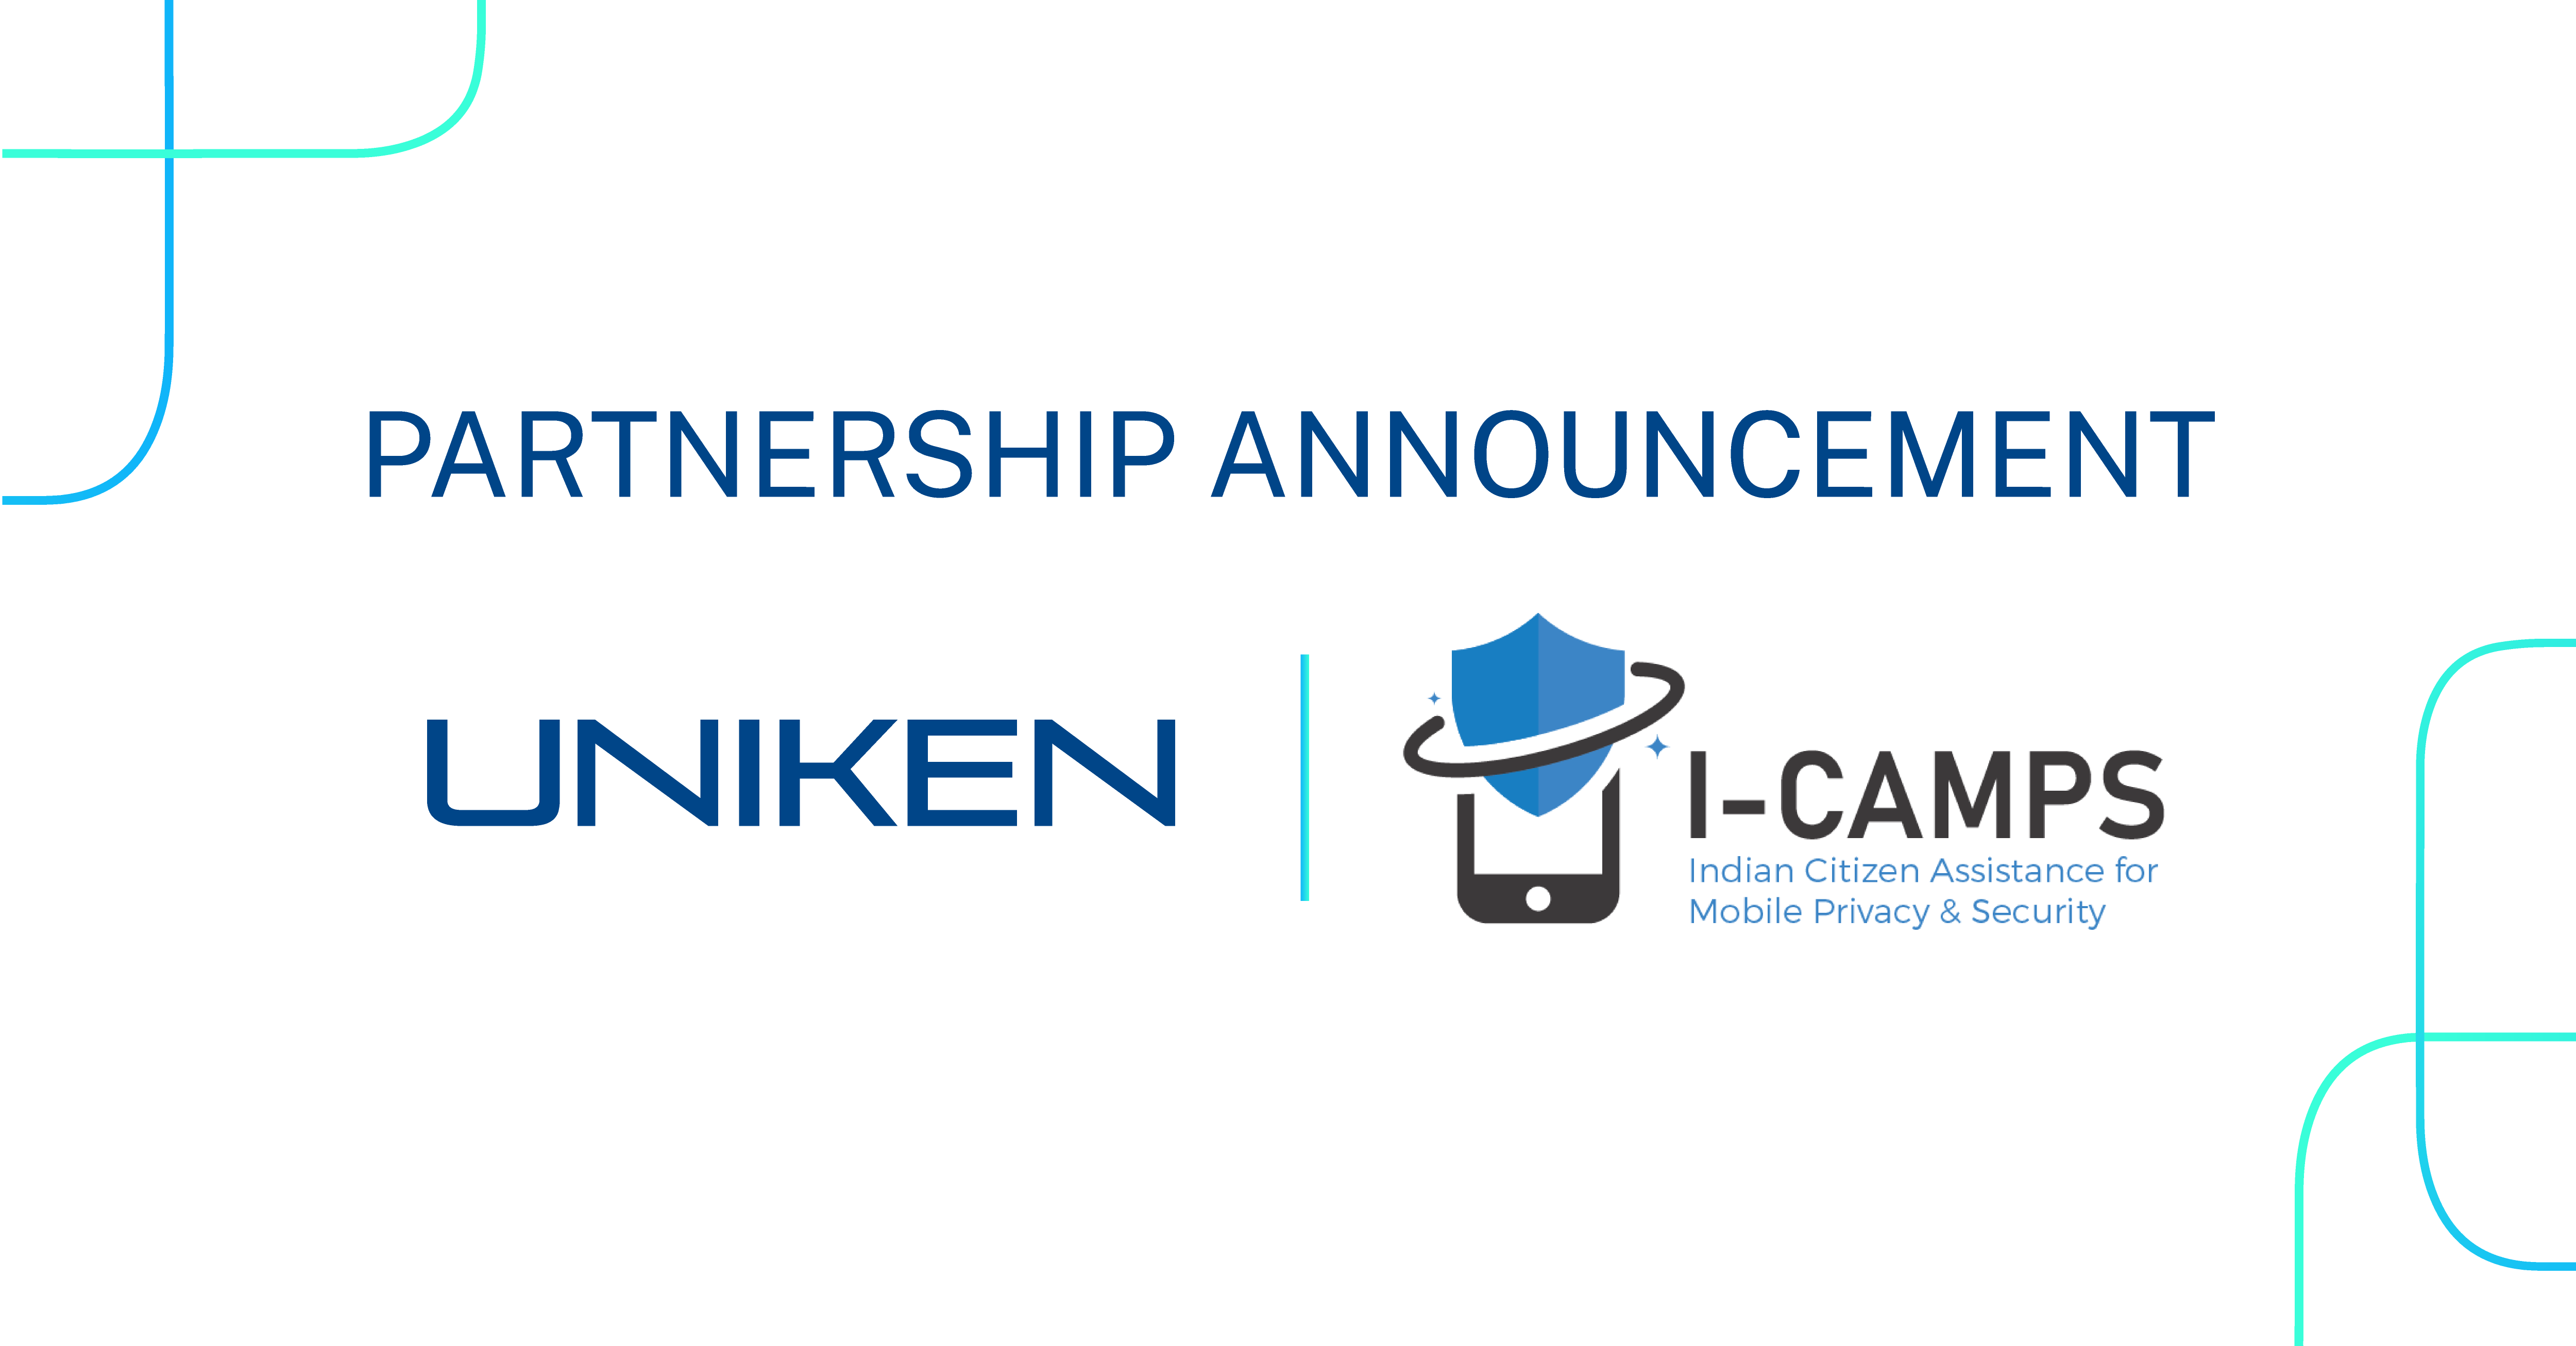 ICAMPS and Uniken Logos with the text "Partnership Announcement" above it